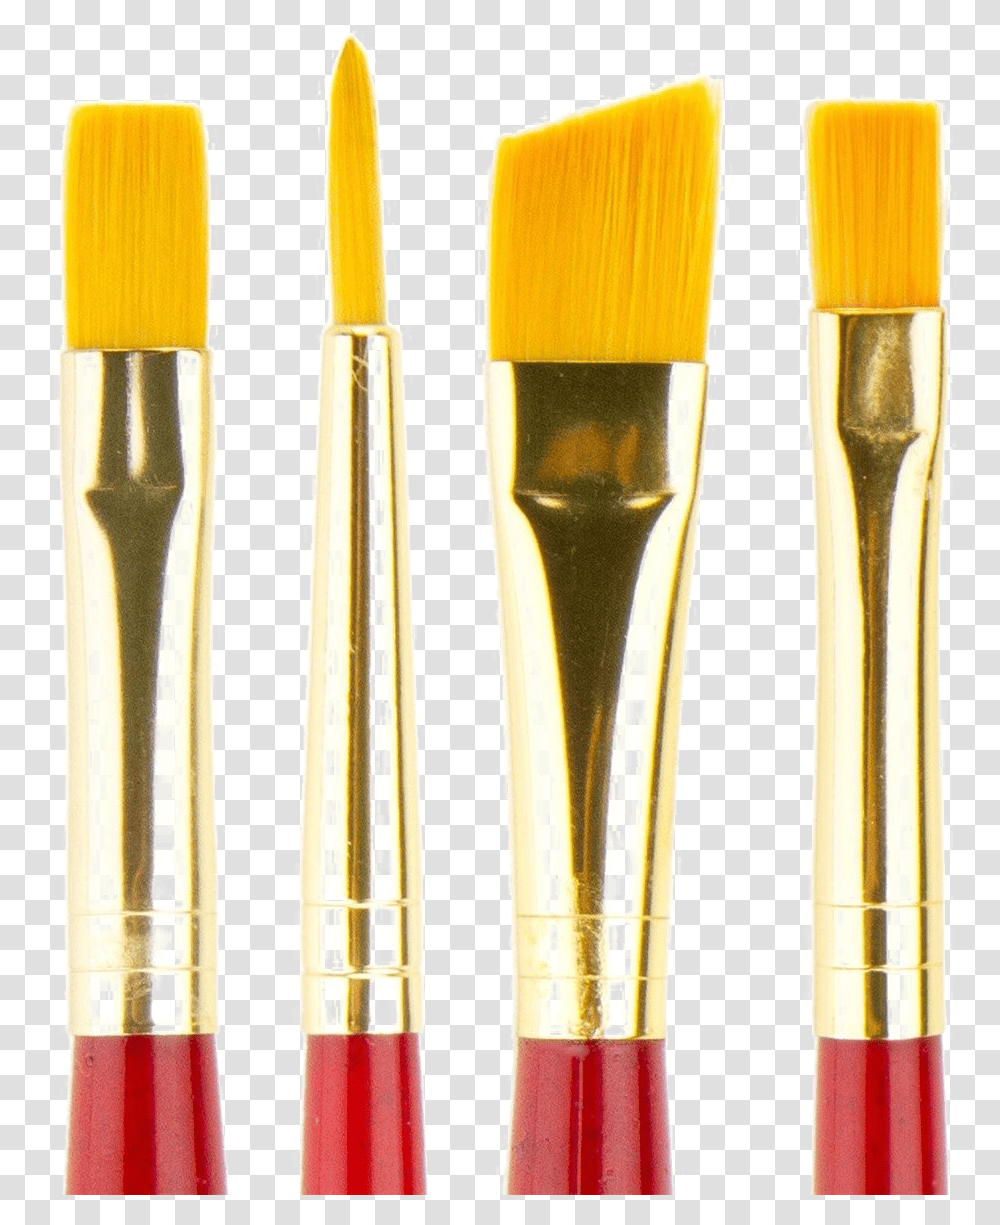 Paint Brush Free Download Paint Brushes, Tool, Toothbrush Transparent Png